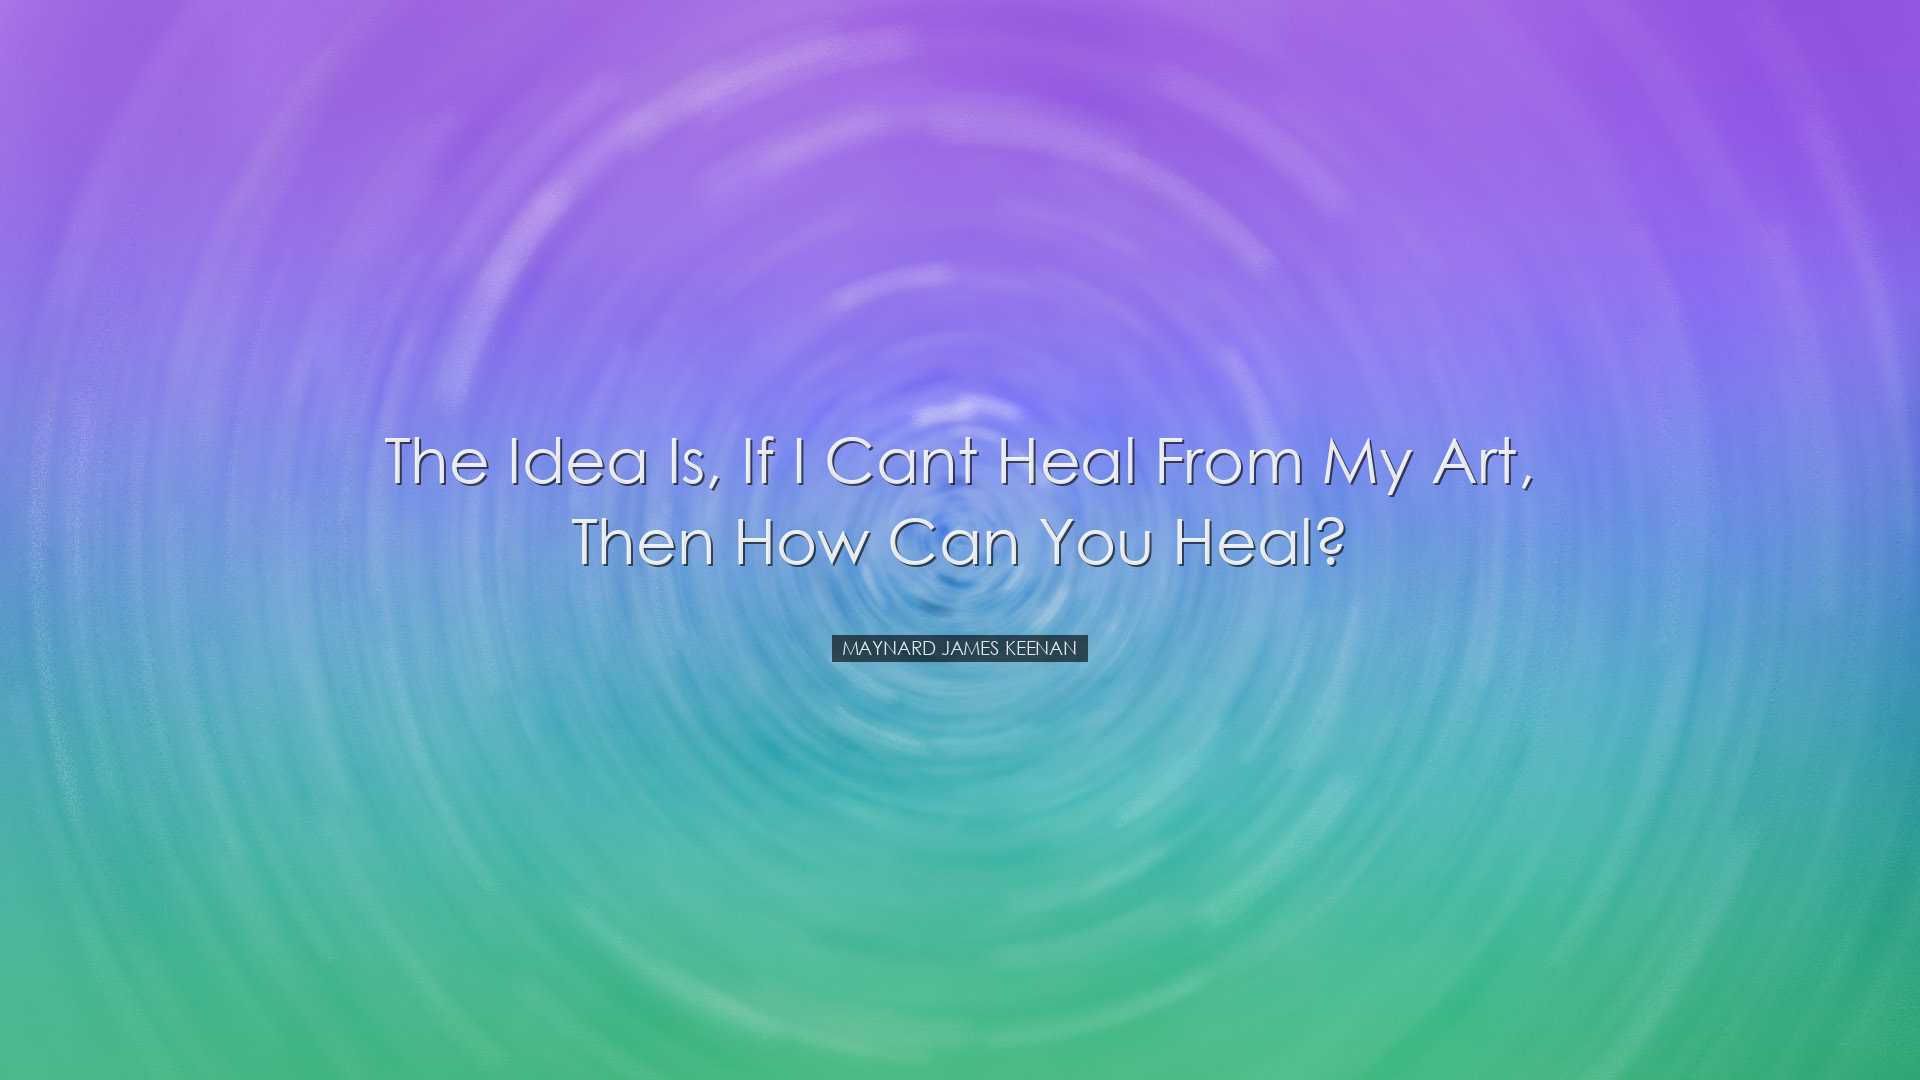 The idea is, if I cant heal from my art, then how can you heal? -